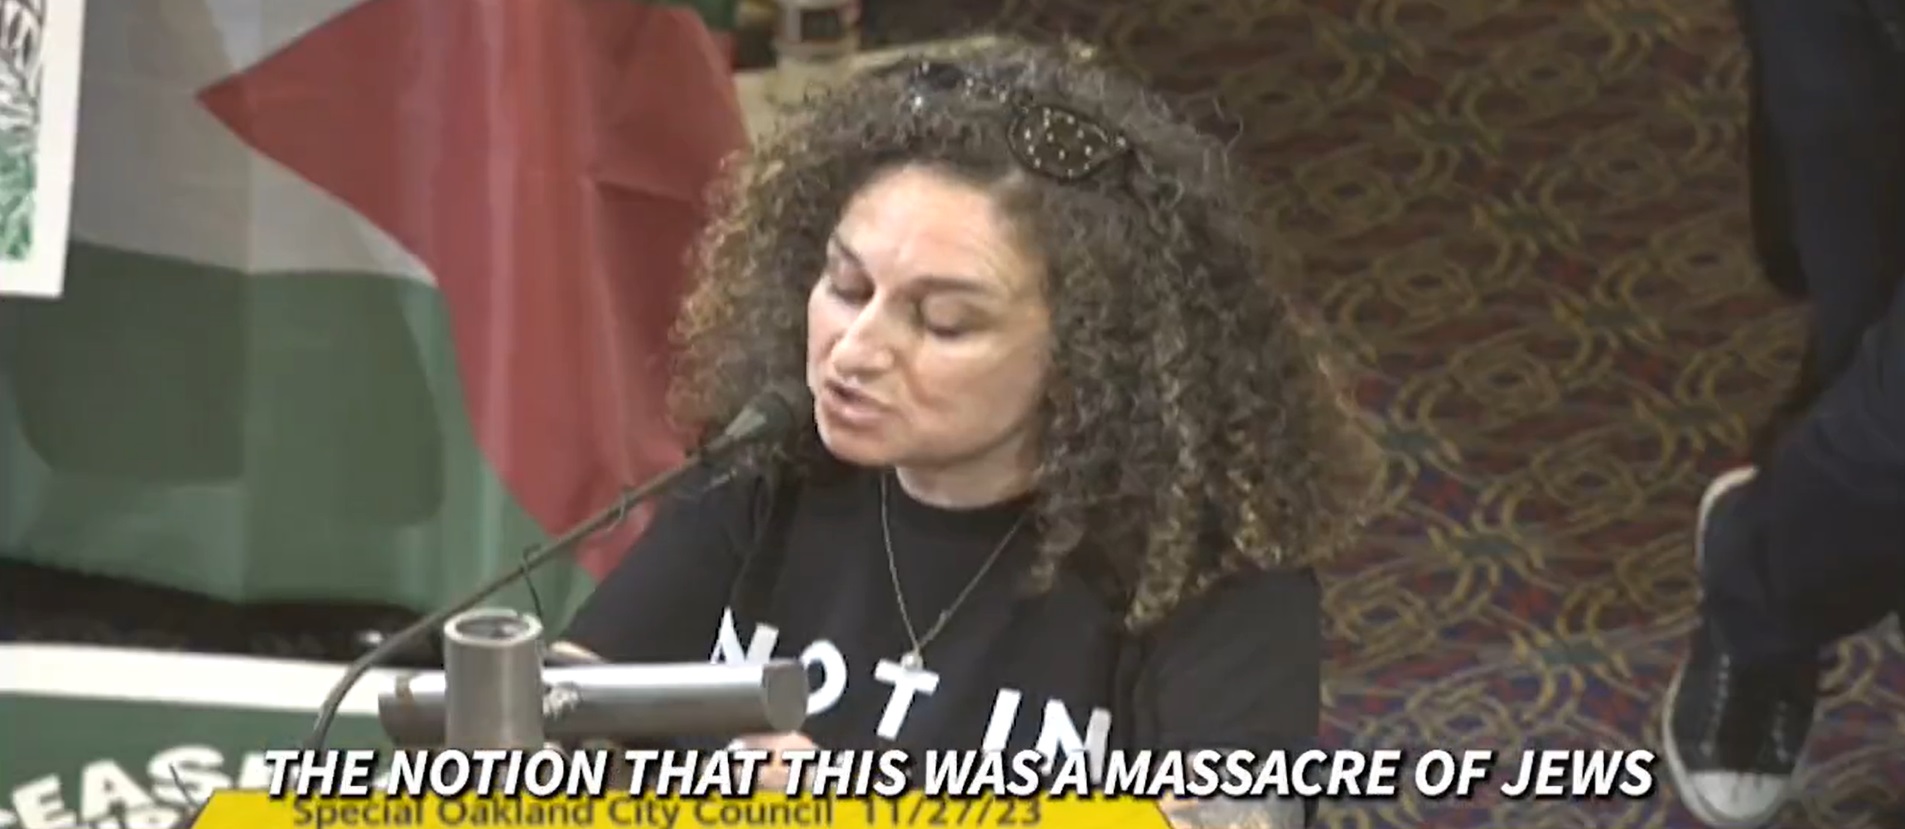 City Council Meeting Erupts Into Chaos As Oakland Residents Loudly Object To Condemning Hamas